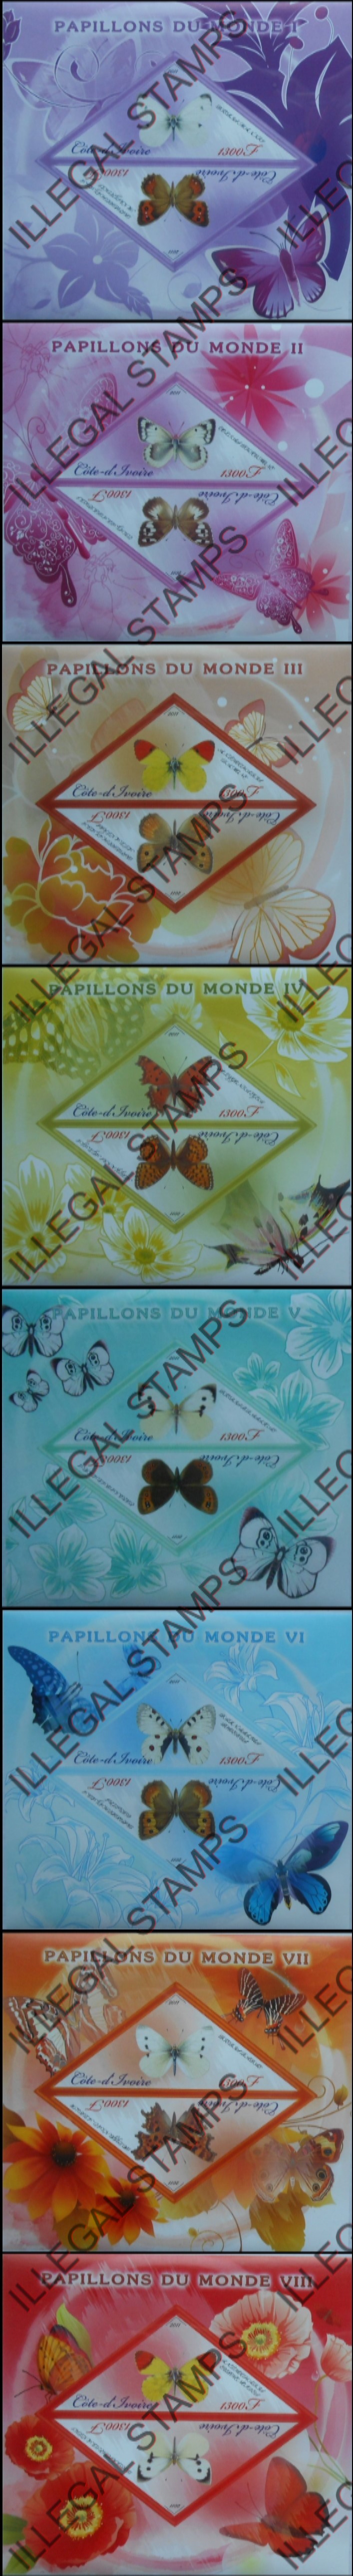 Ivory Coast 2011 Butterflies Illegal Stamp Souvenir Sheets of 2 (Triangles)